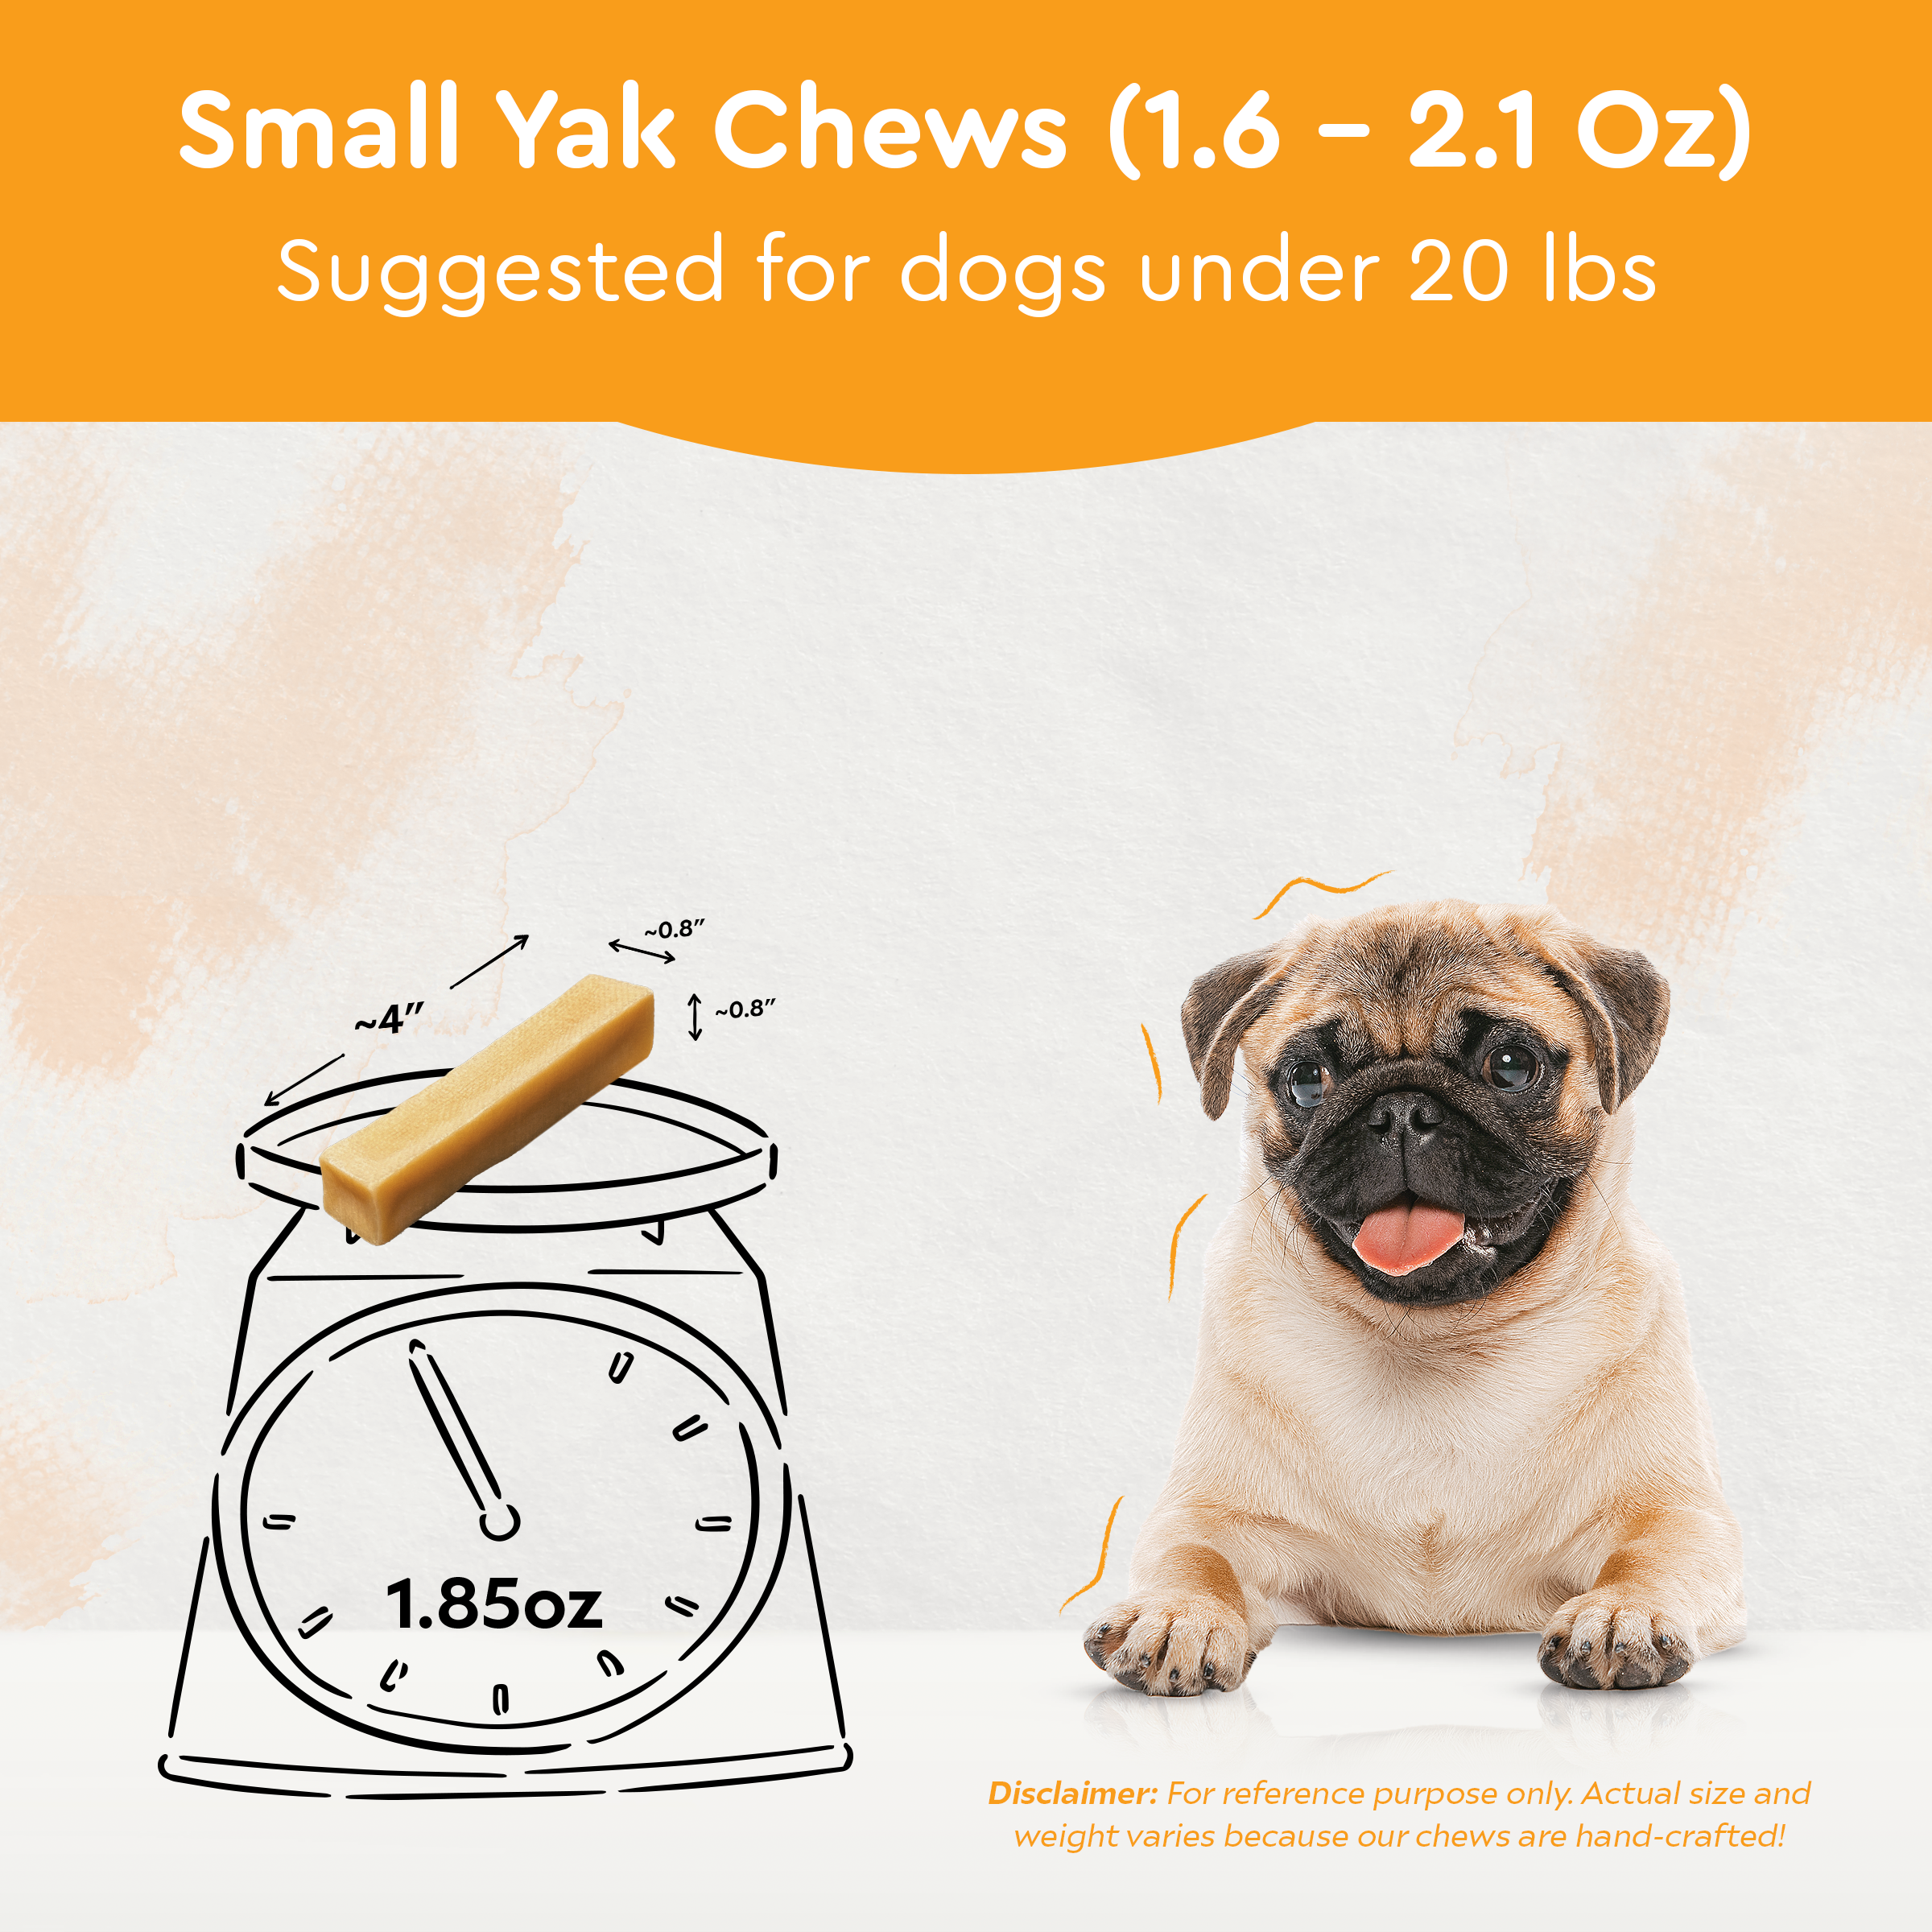 SMALL YAKS / Best for dogs under 20 lbs